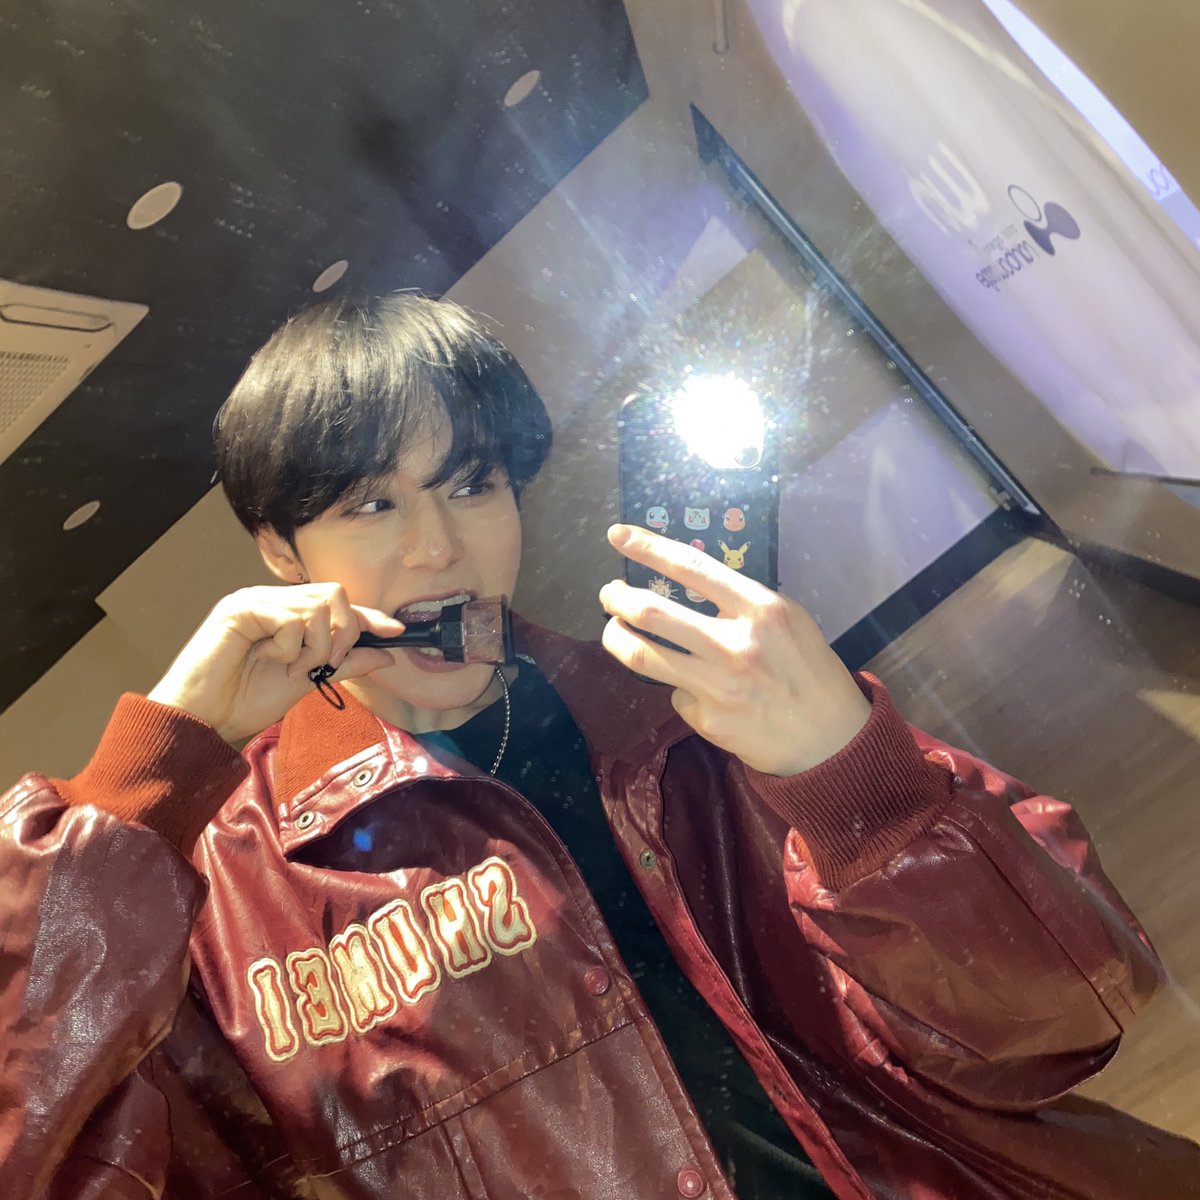 [#WOONG_MIRROR] 

바쁘다 바빠 현대사회🔥

#HWANWOONG #환웅 #웅미러